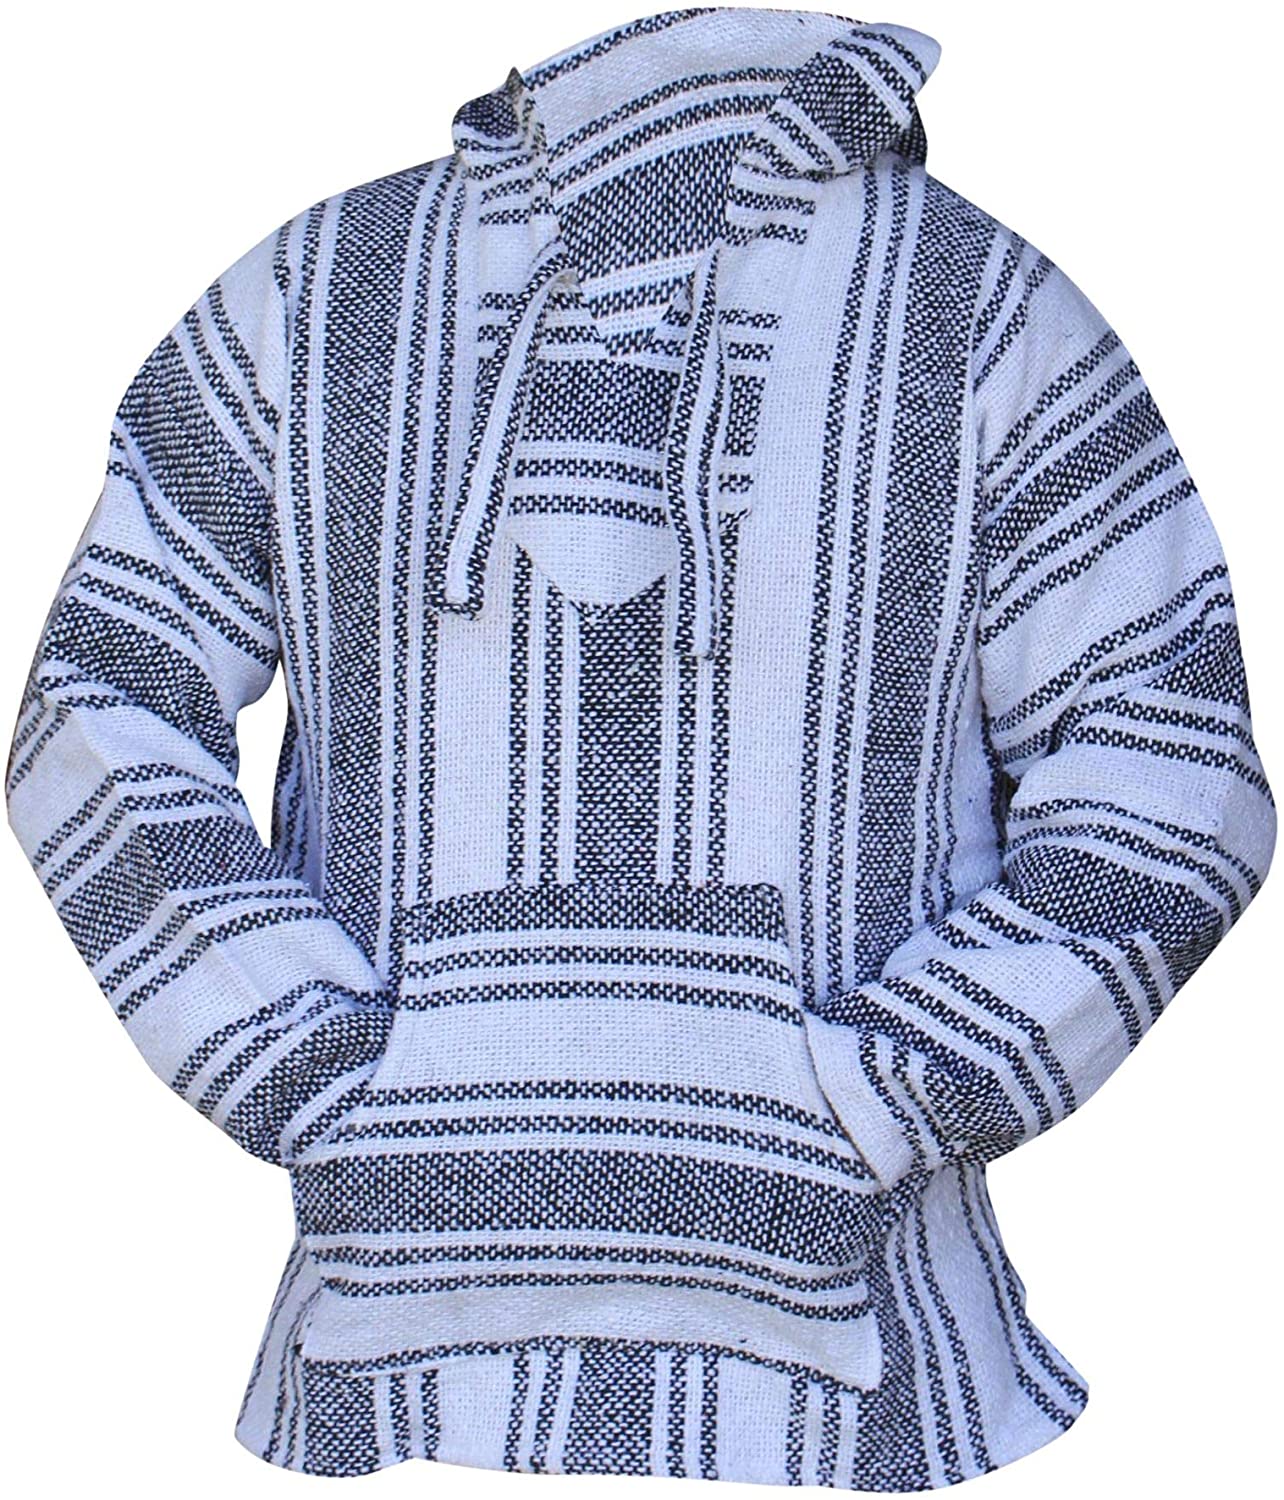 poncho sweater mexican